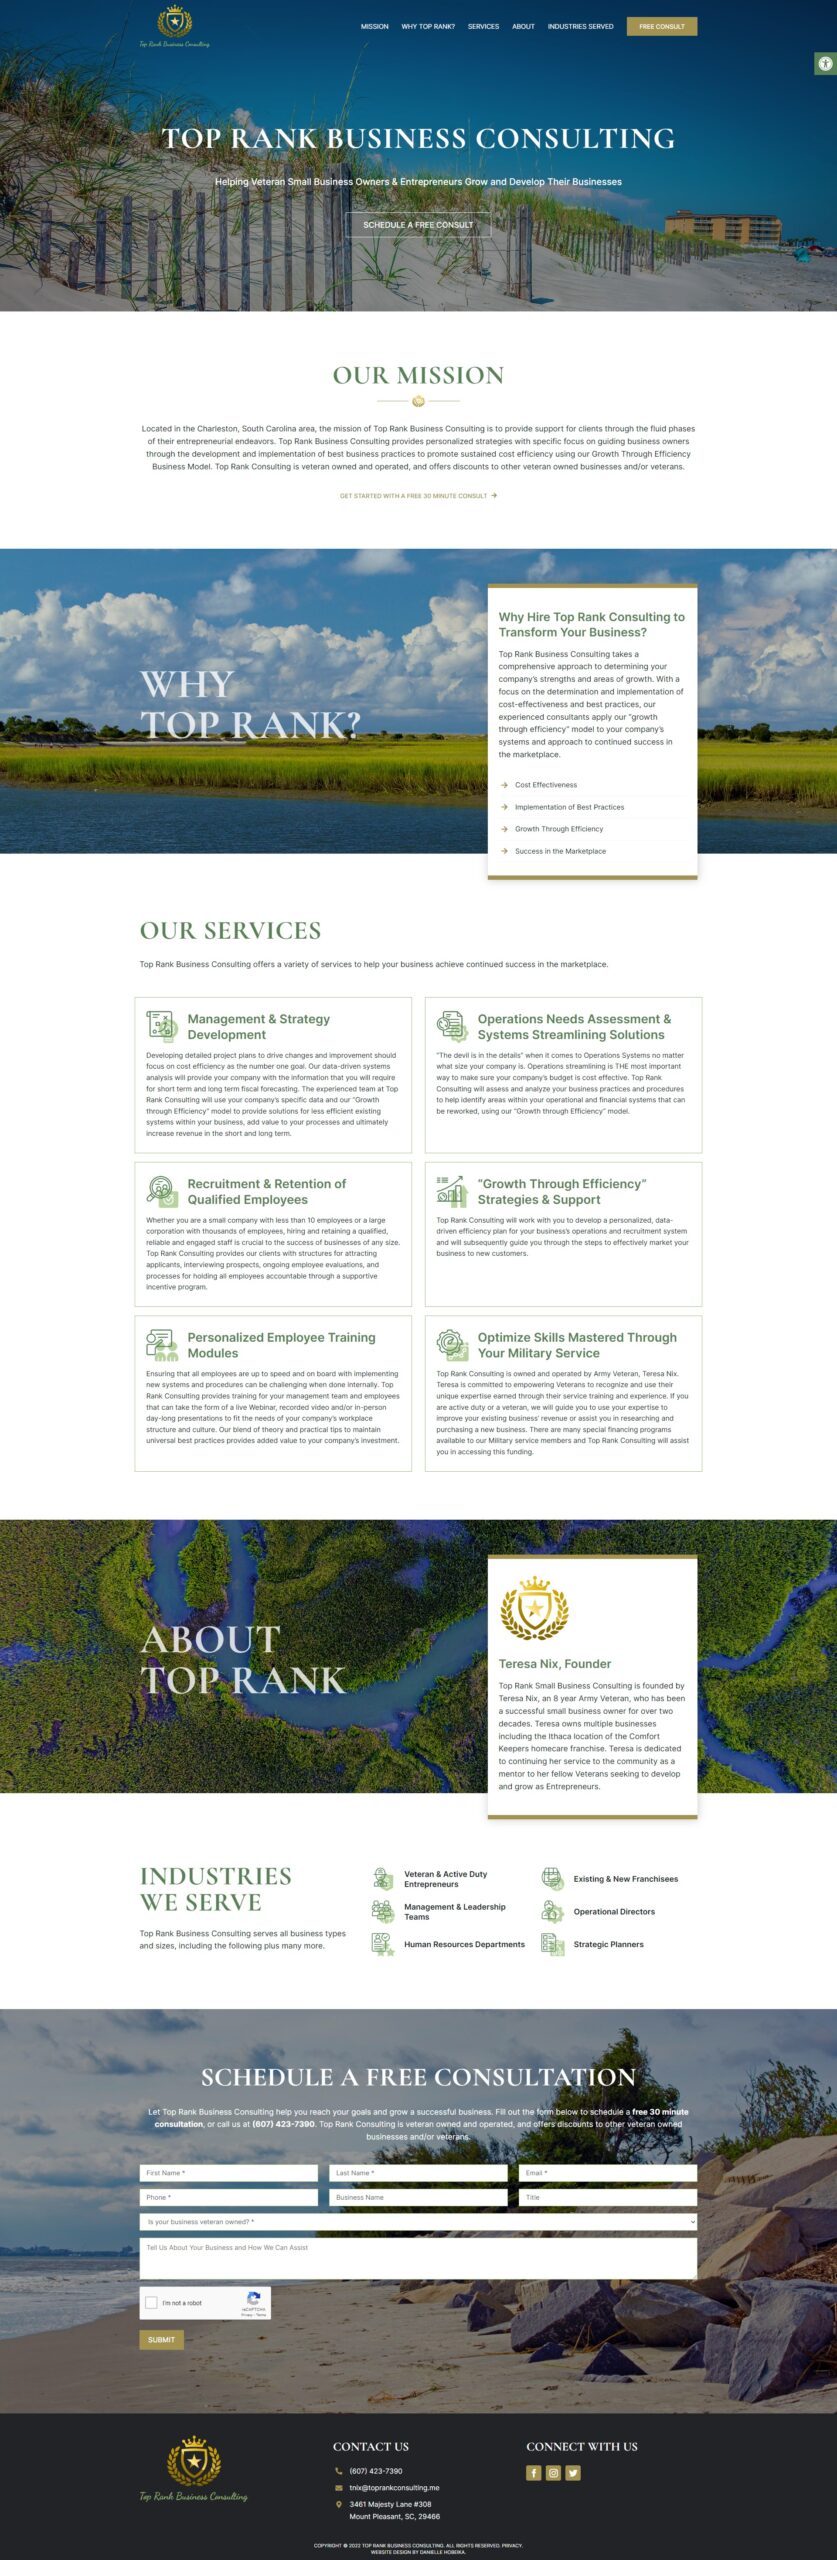 Web Design for Top Rank Business Consulting in Mount Pleasant, SC